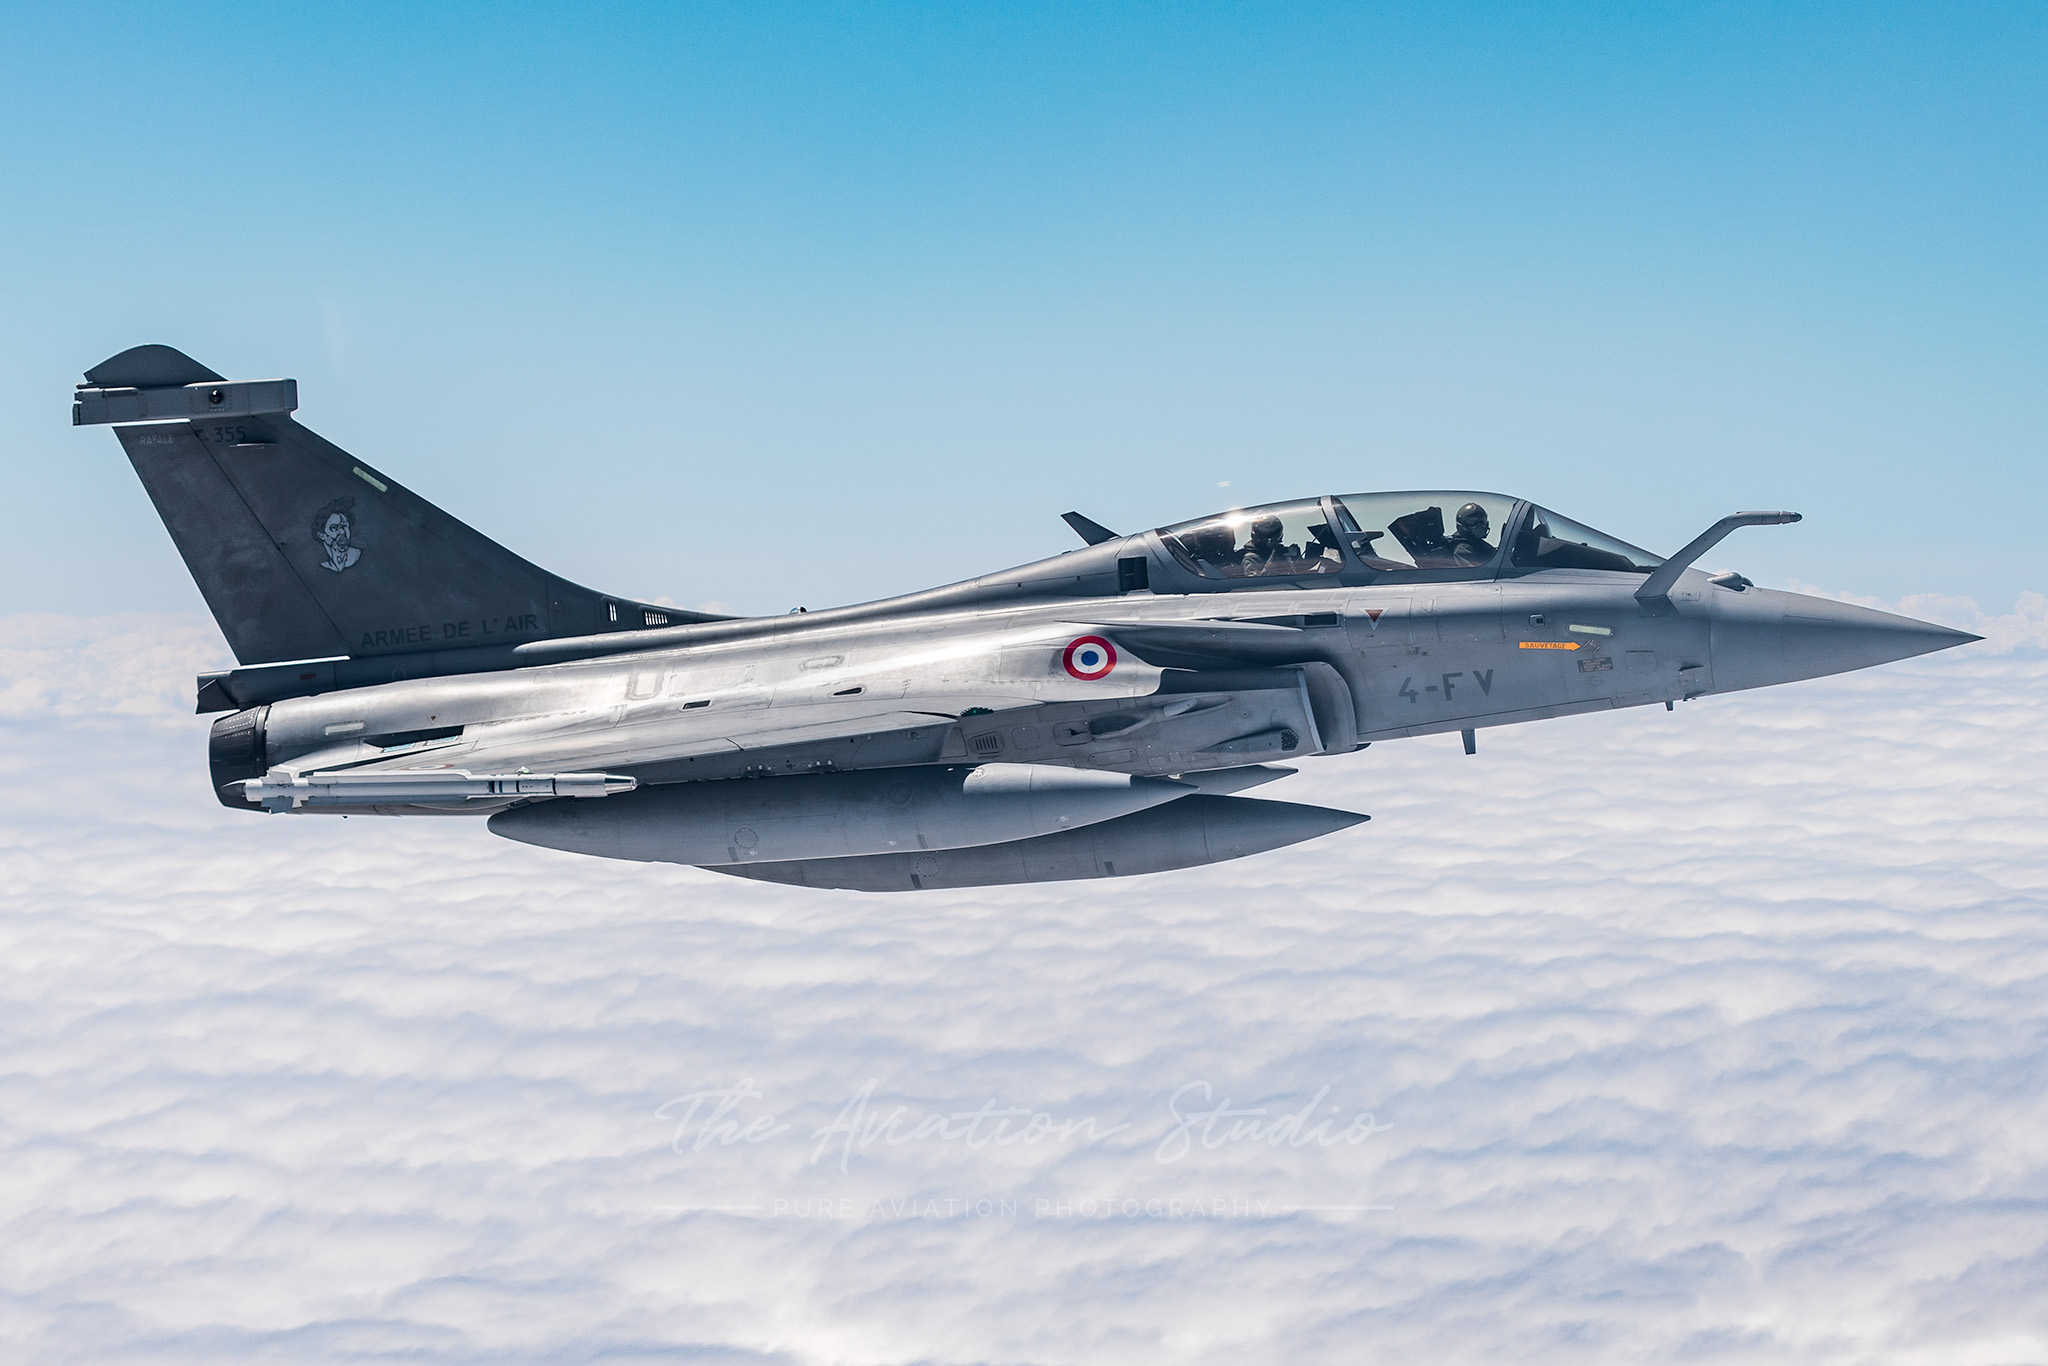 French Air and Space Force Rafale B 4-FV in formation with KC-30A A39-003 (Image: Emil Cooper)